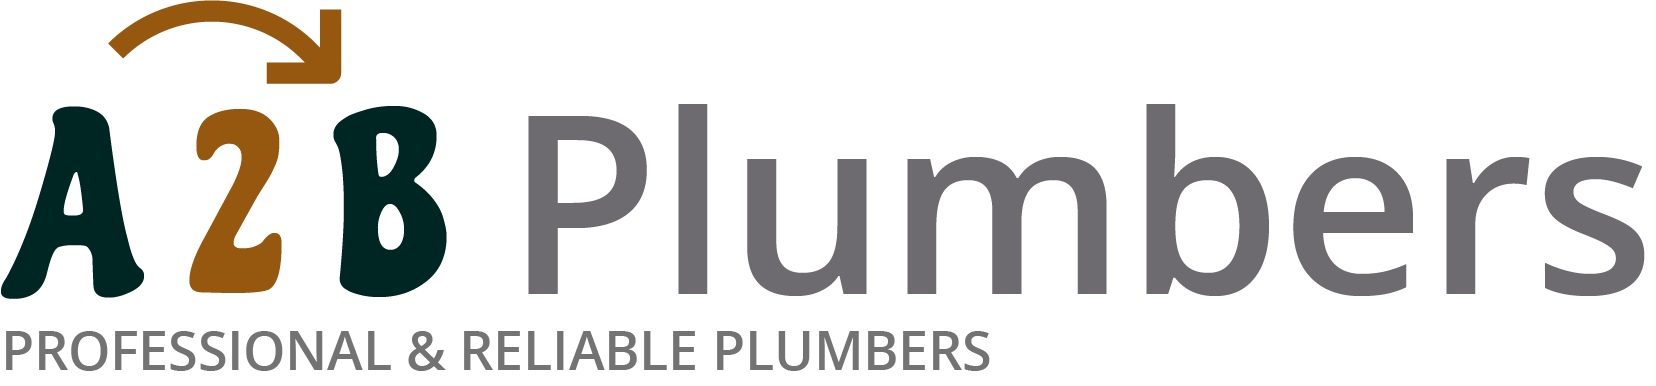 If you need a boiler installed, a radiator repaired or a leaking tap fixed, call us now - we provide services for properties in Raunds and the local area.